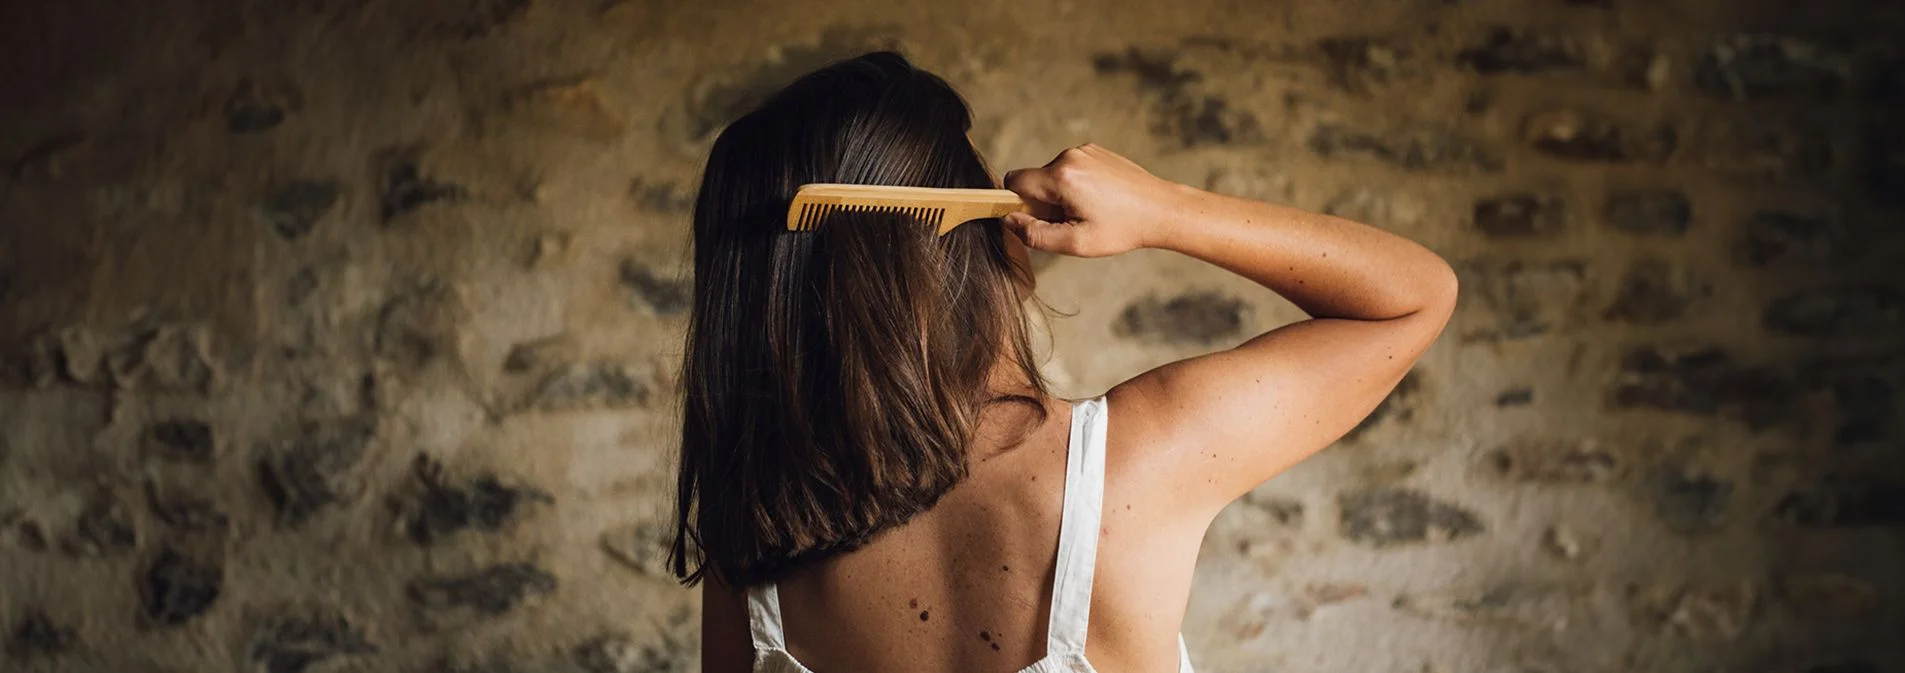 Woman with her back turned running a comb through her straight brown hair.